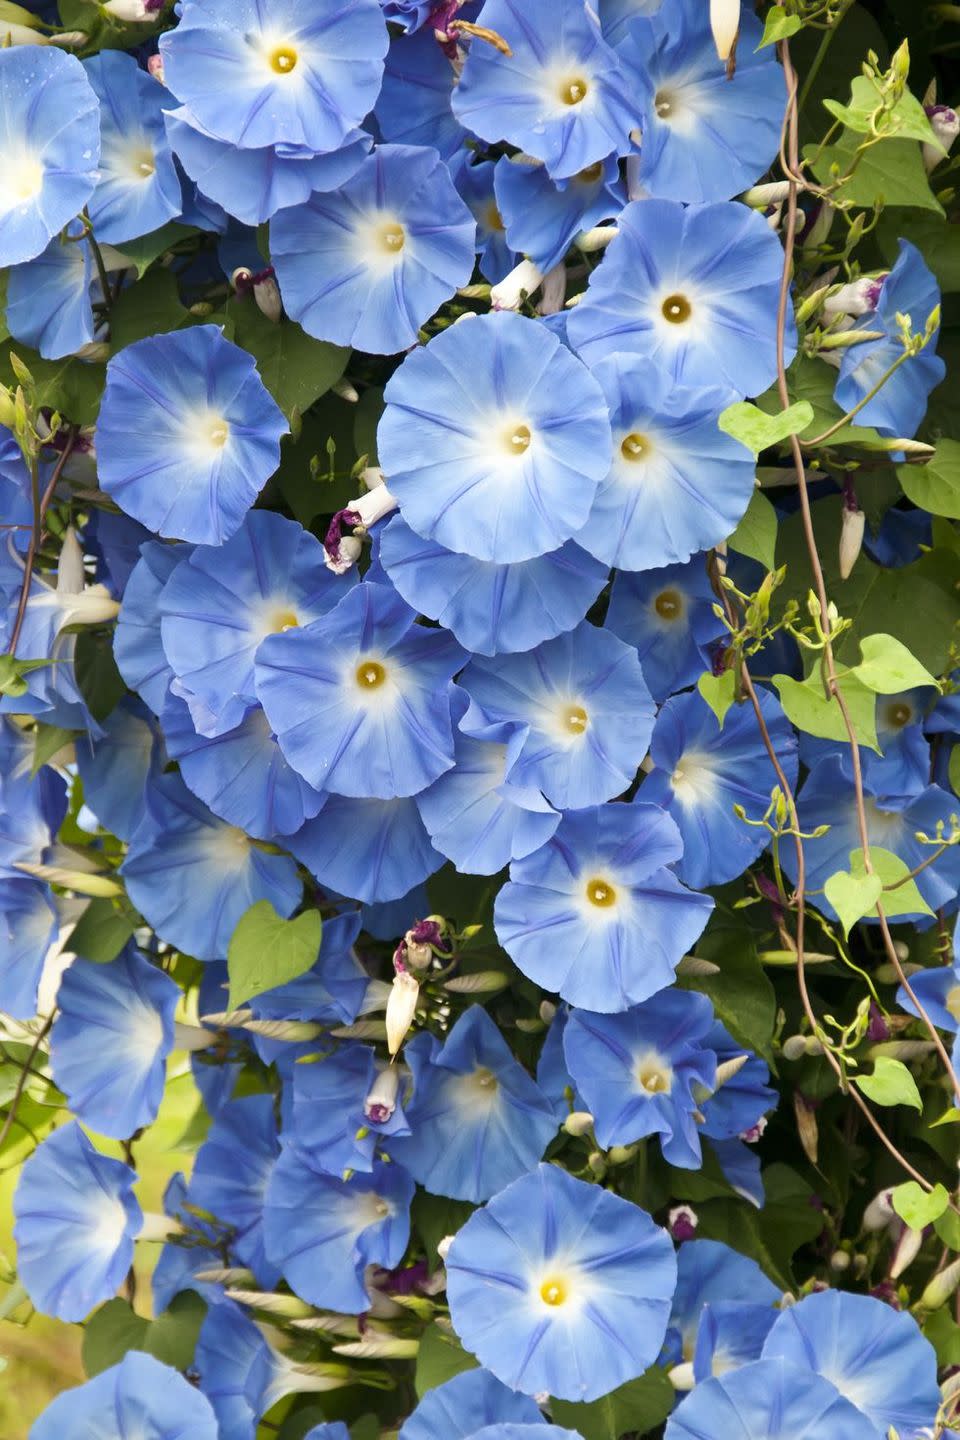 flower meanings, blue morning glory 